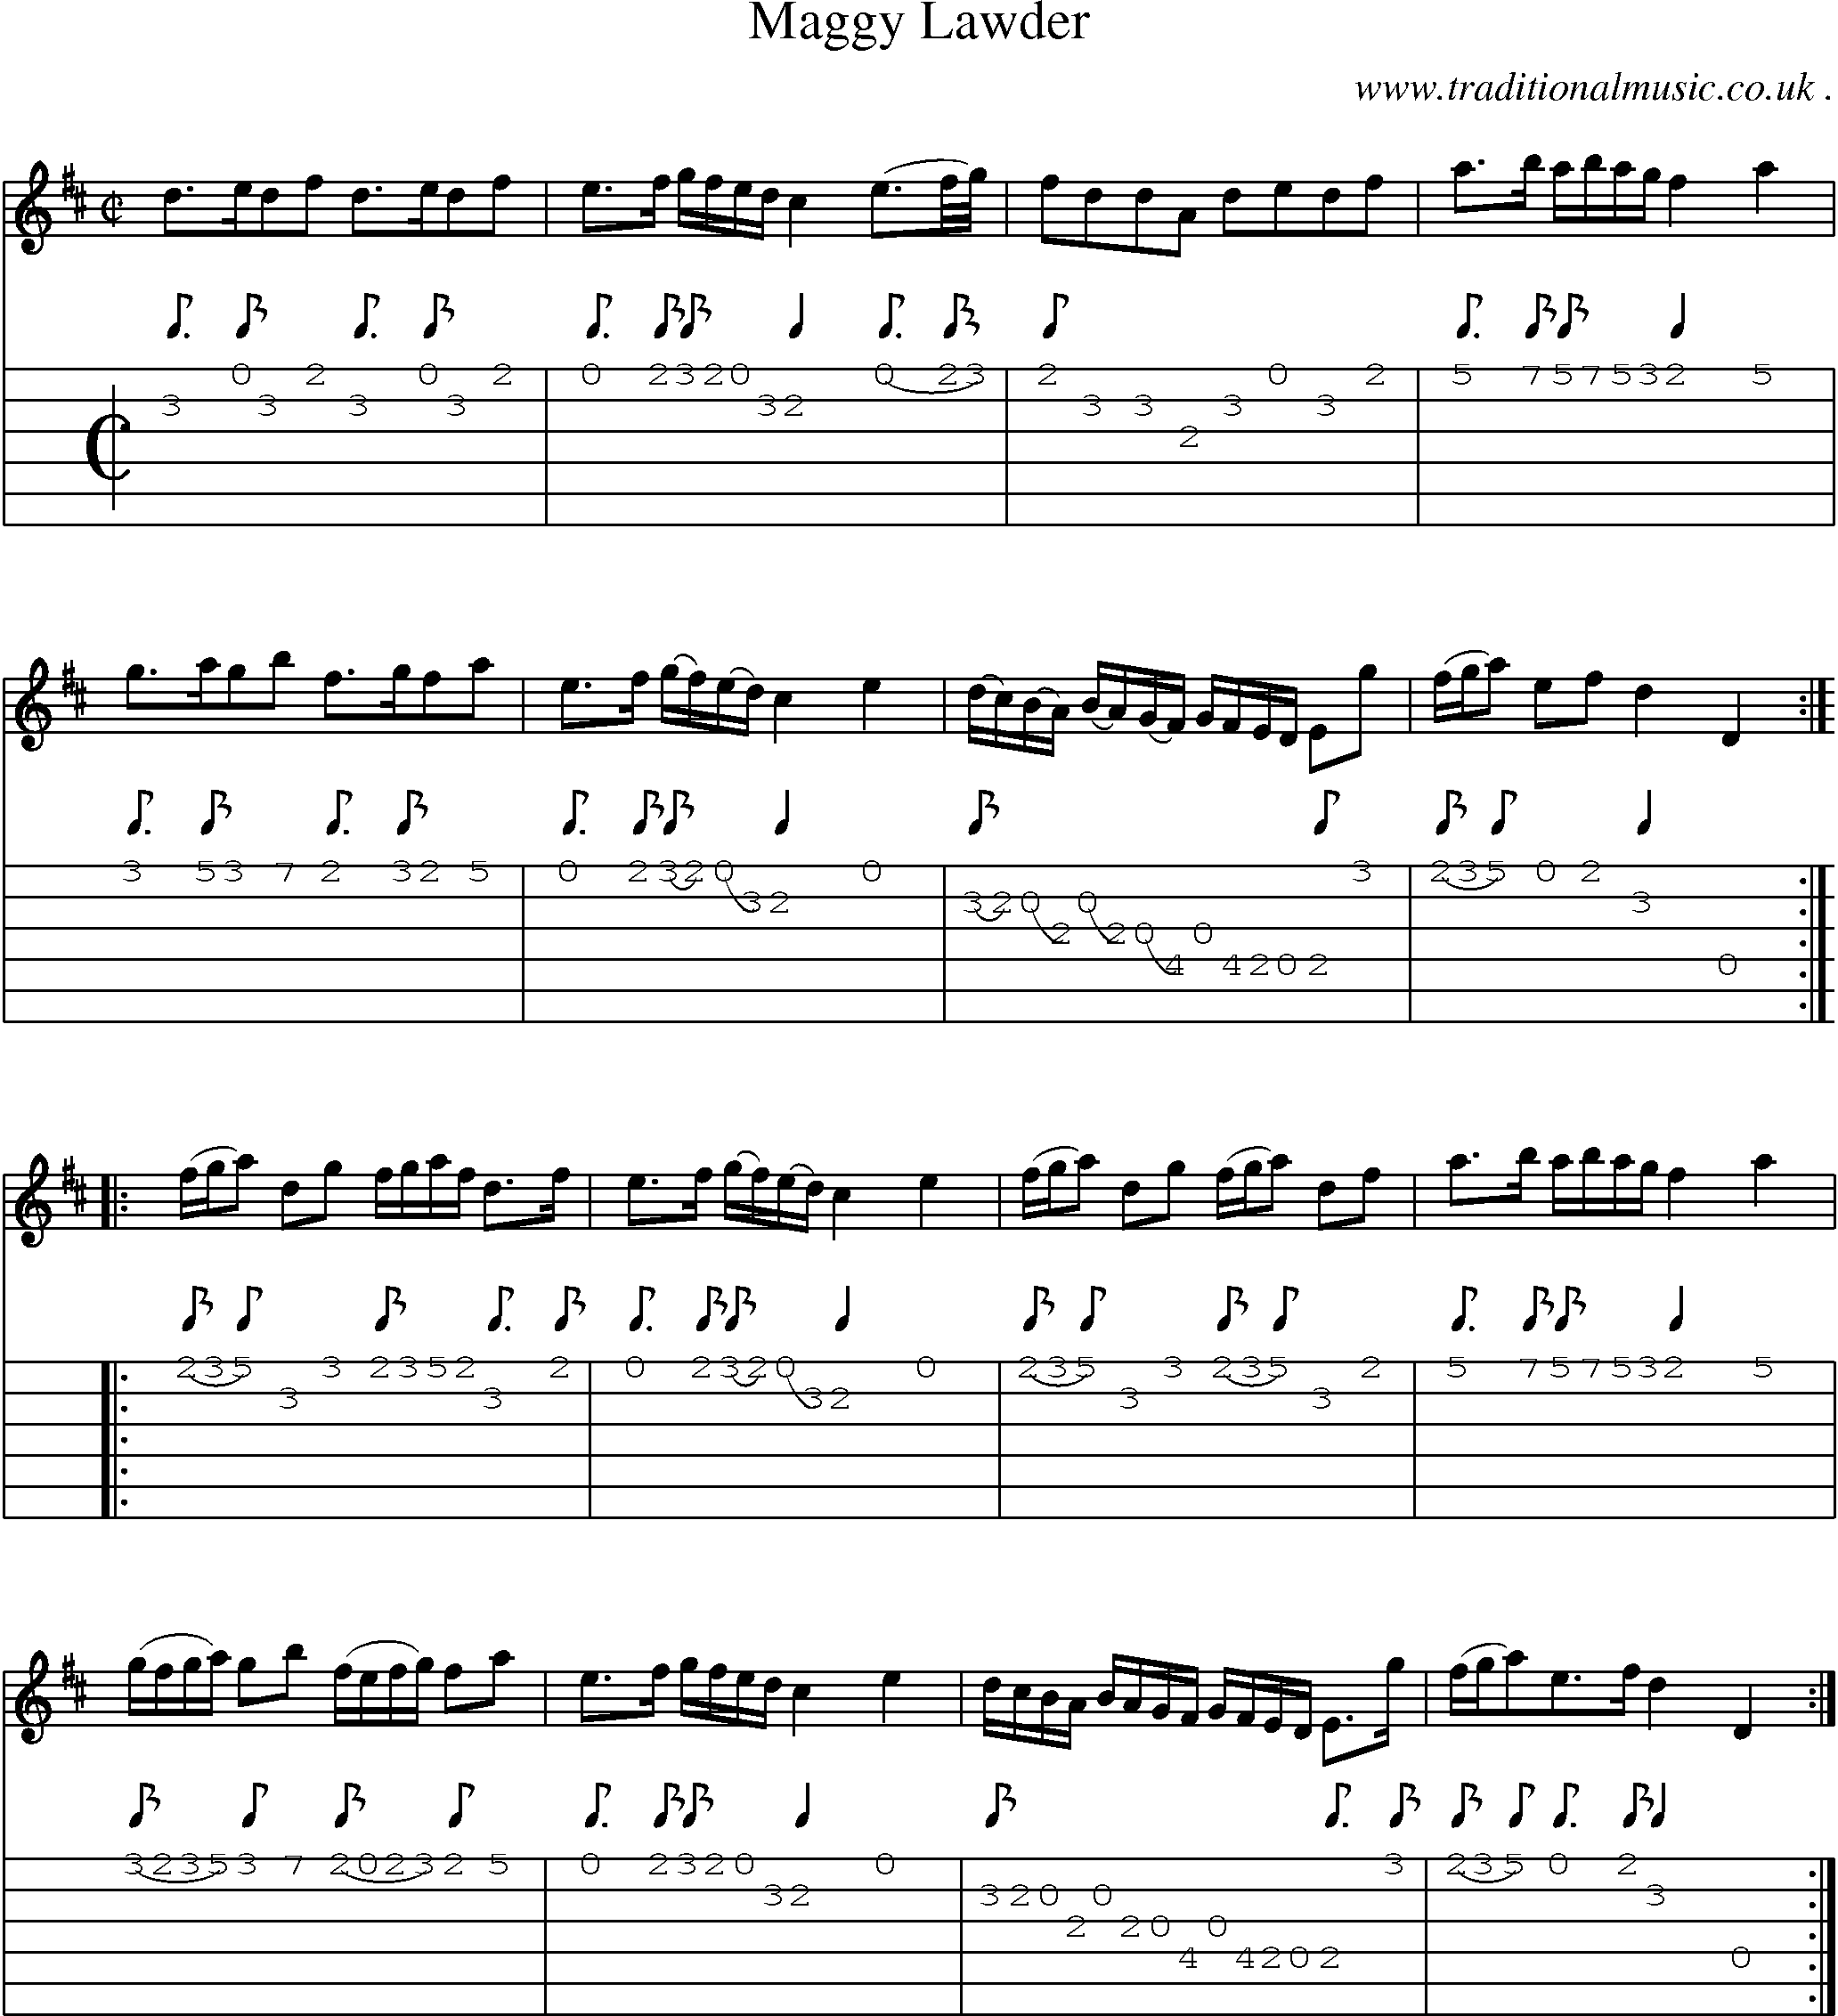 Sheet-Music and Guitar Tabs for Maggy Lawder